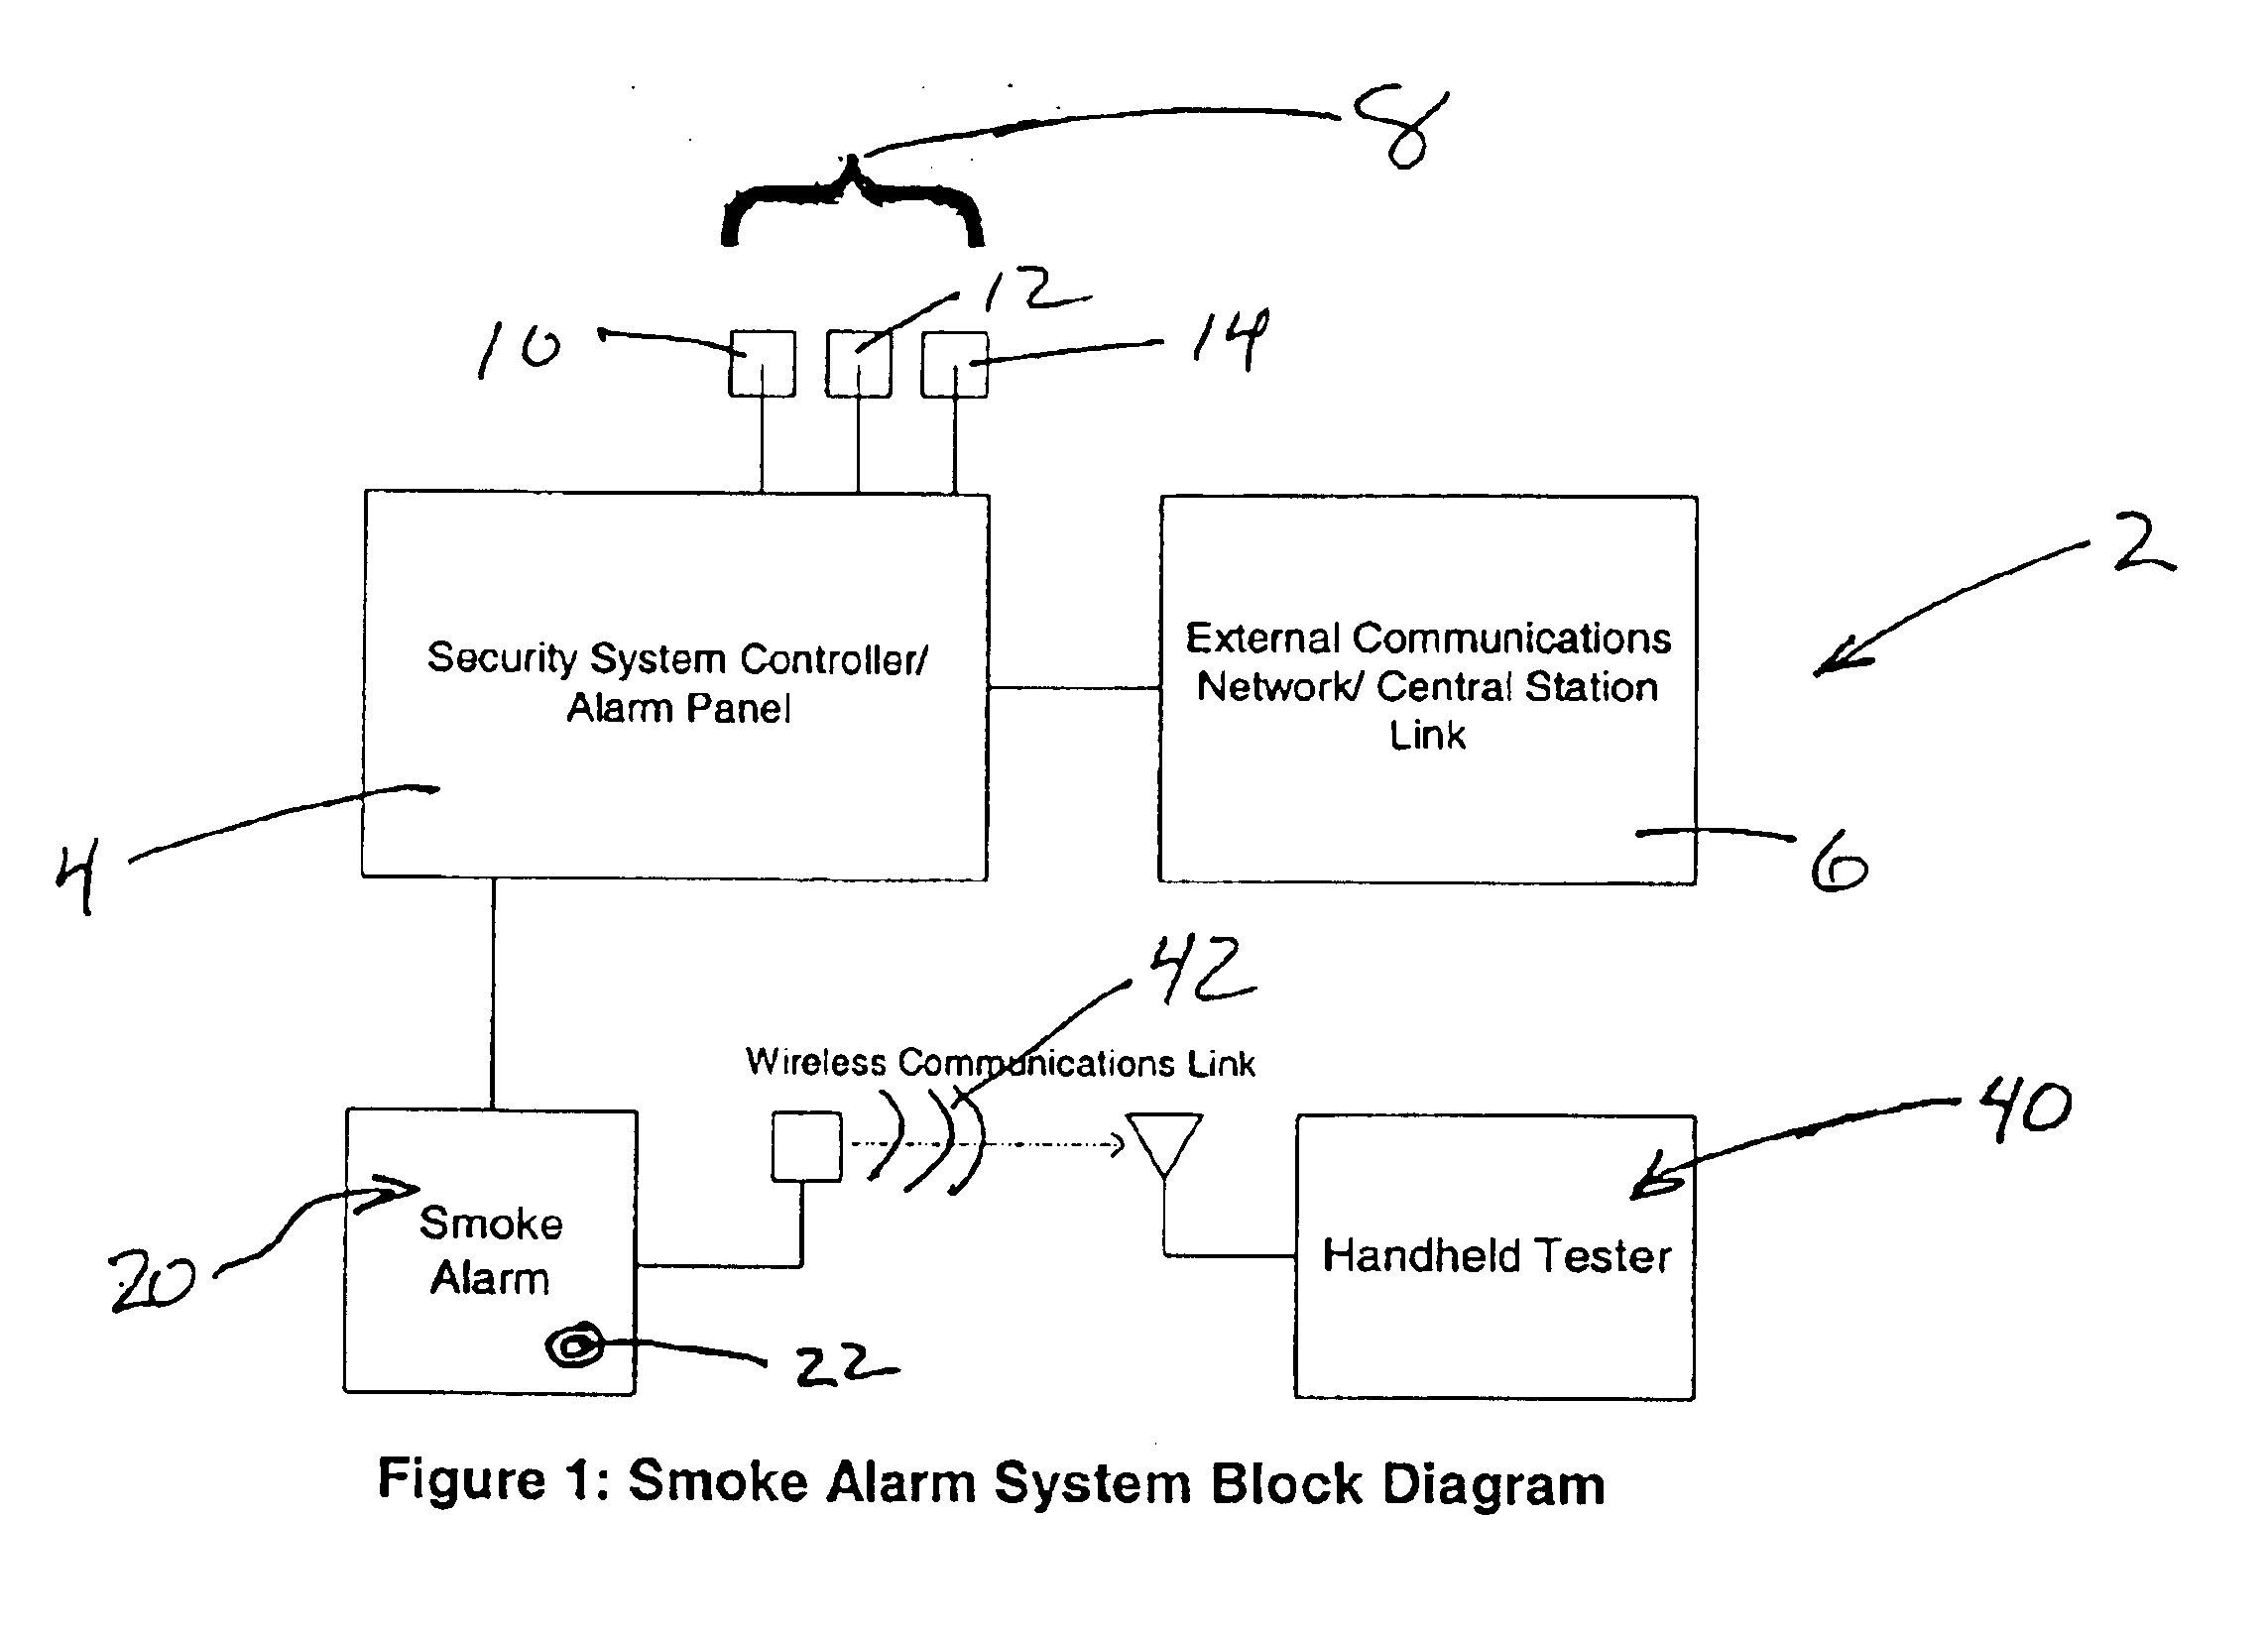 Smoke detector with performance reporting